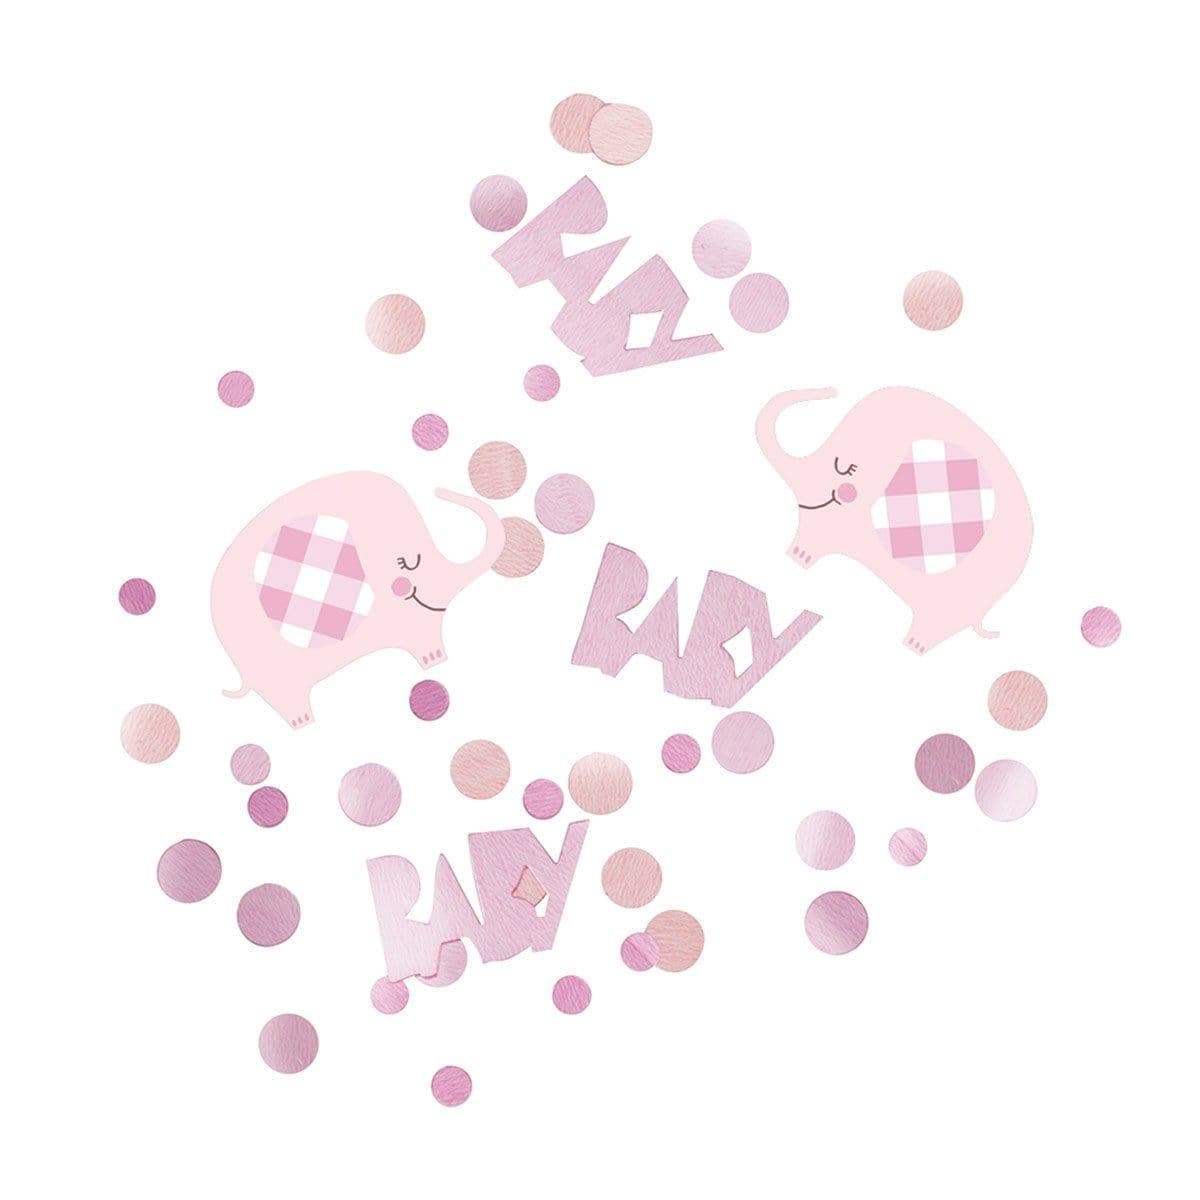 Buy Baby Shower Pink Floral Elephant Confetti sold at Party Expert